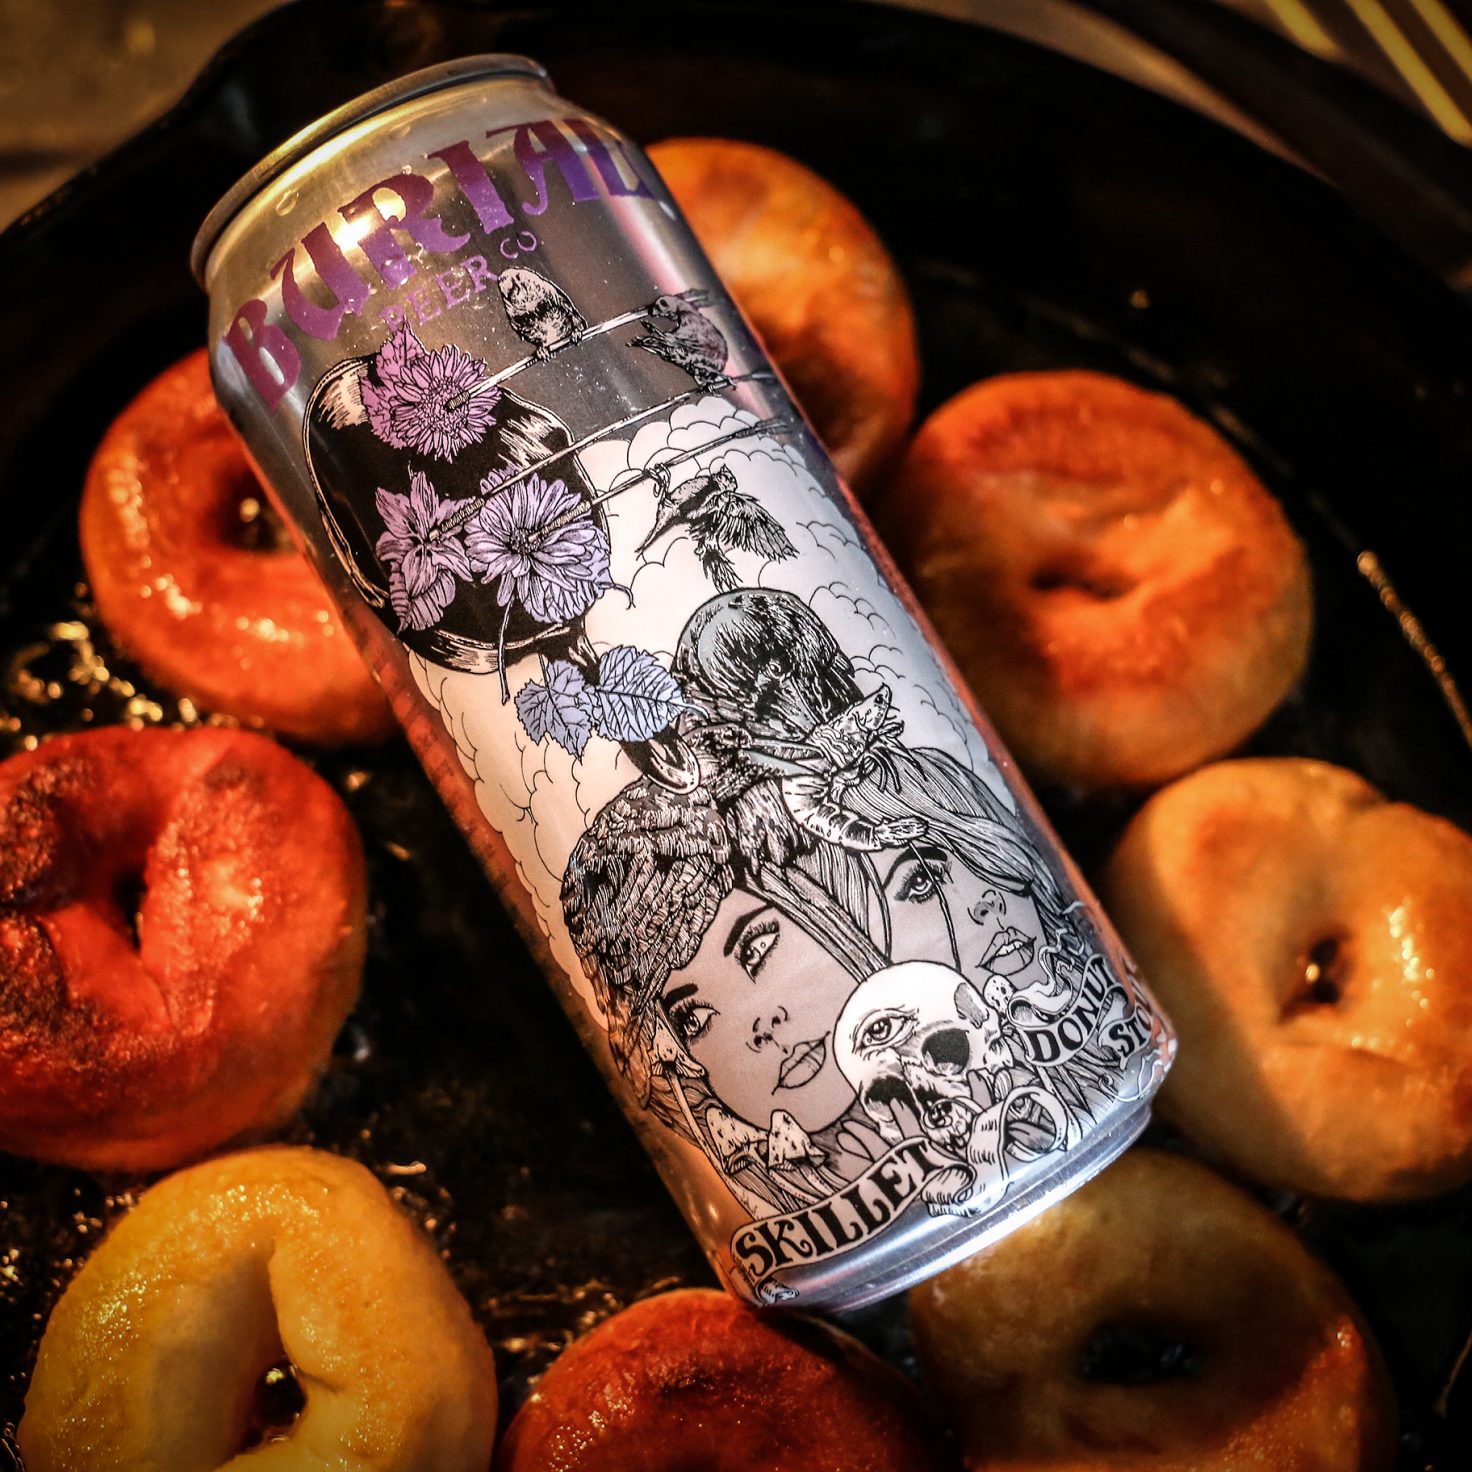 Burial Skillet Donut Stout cans